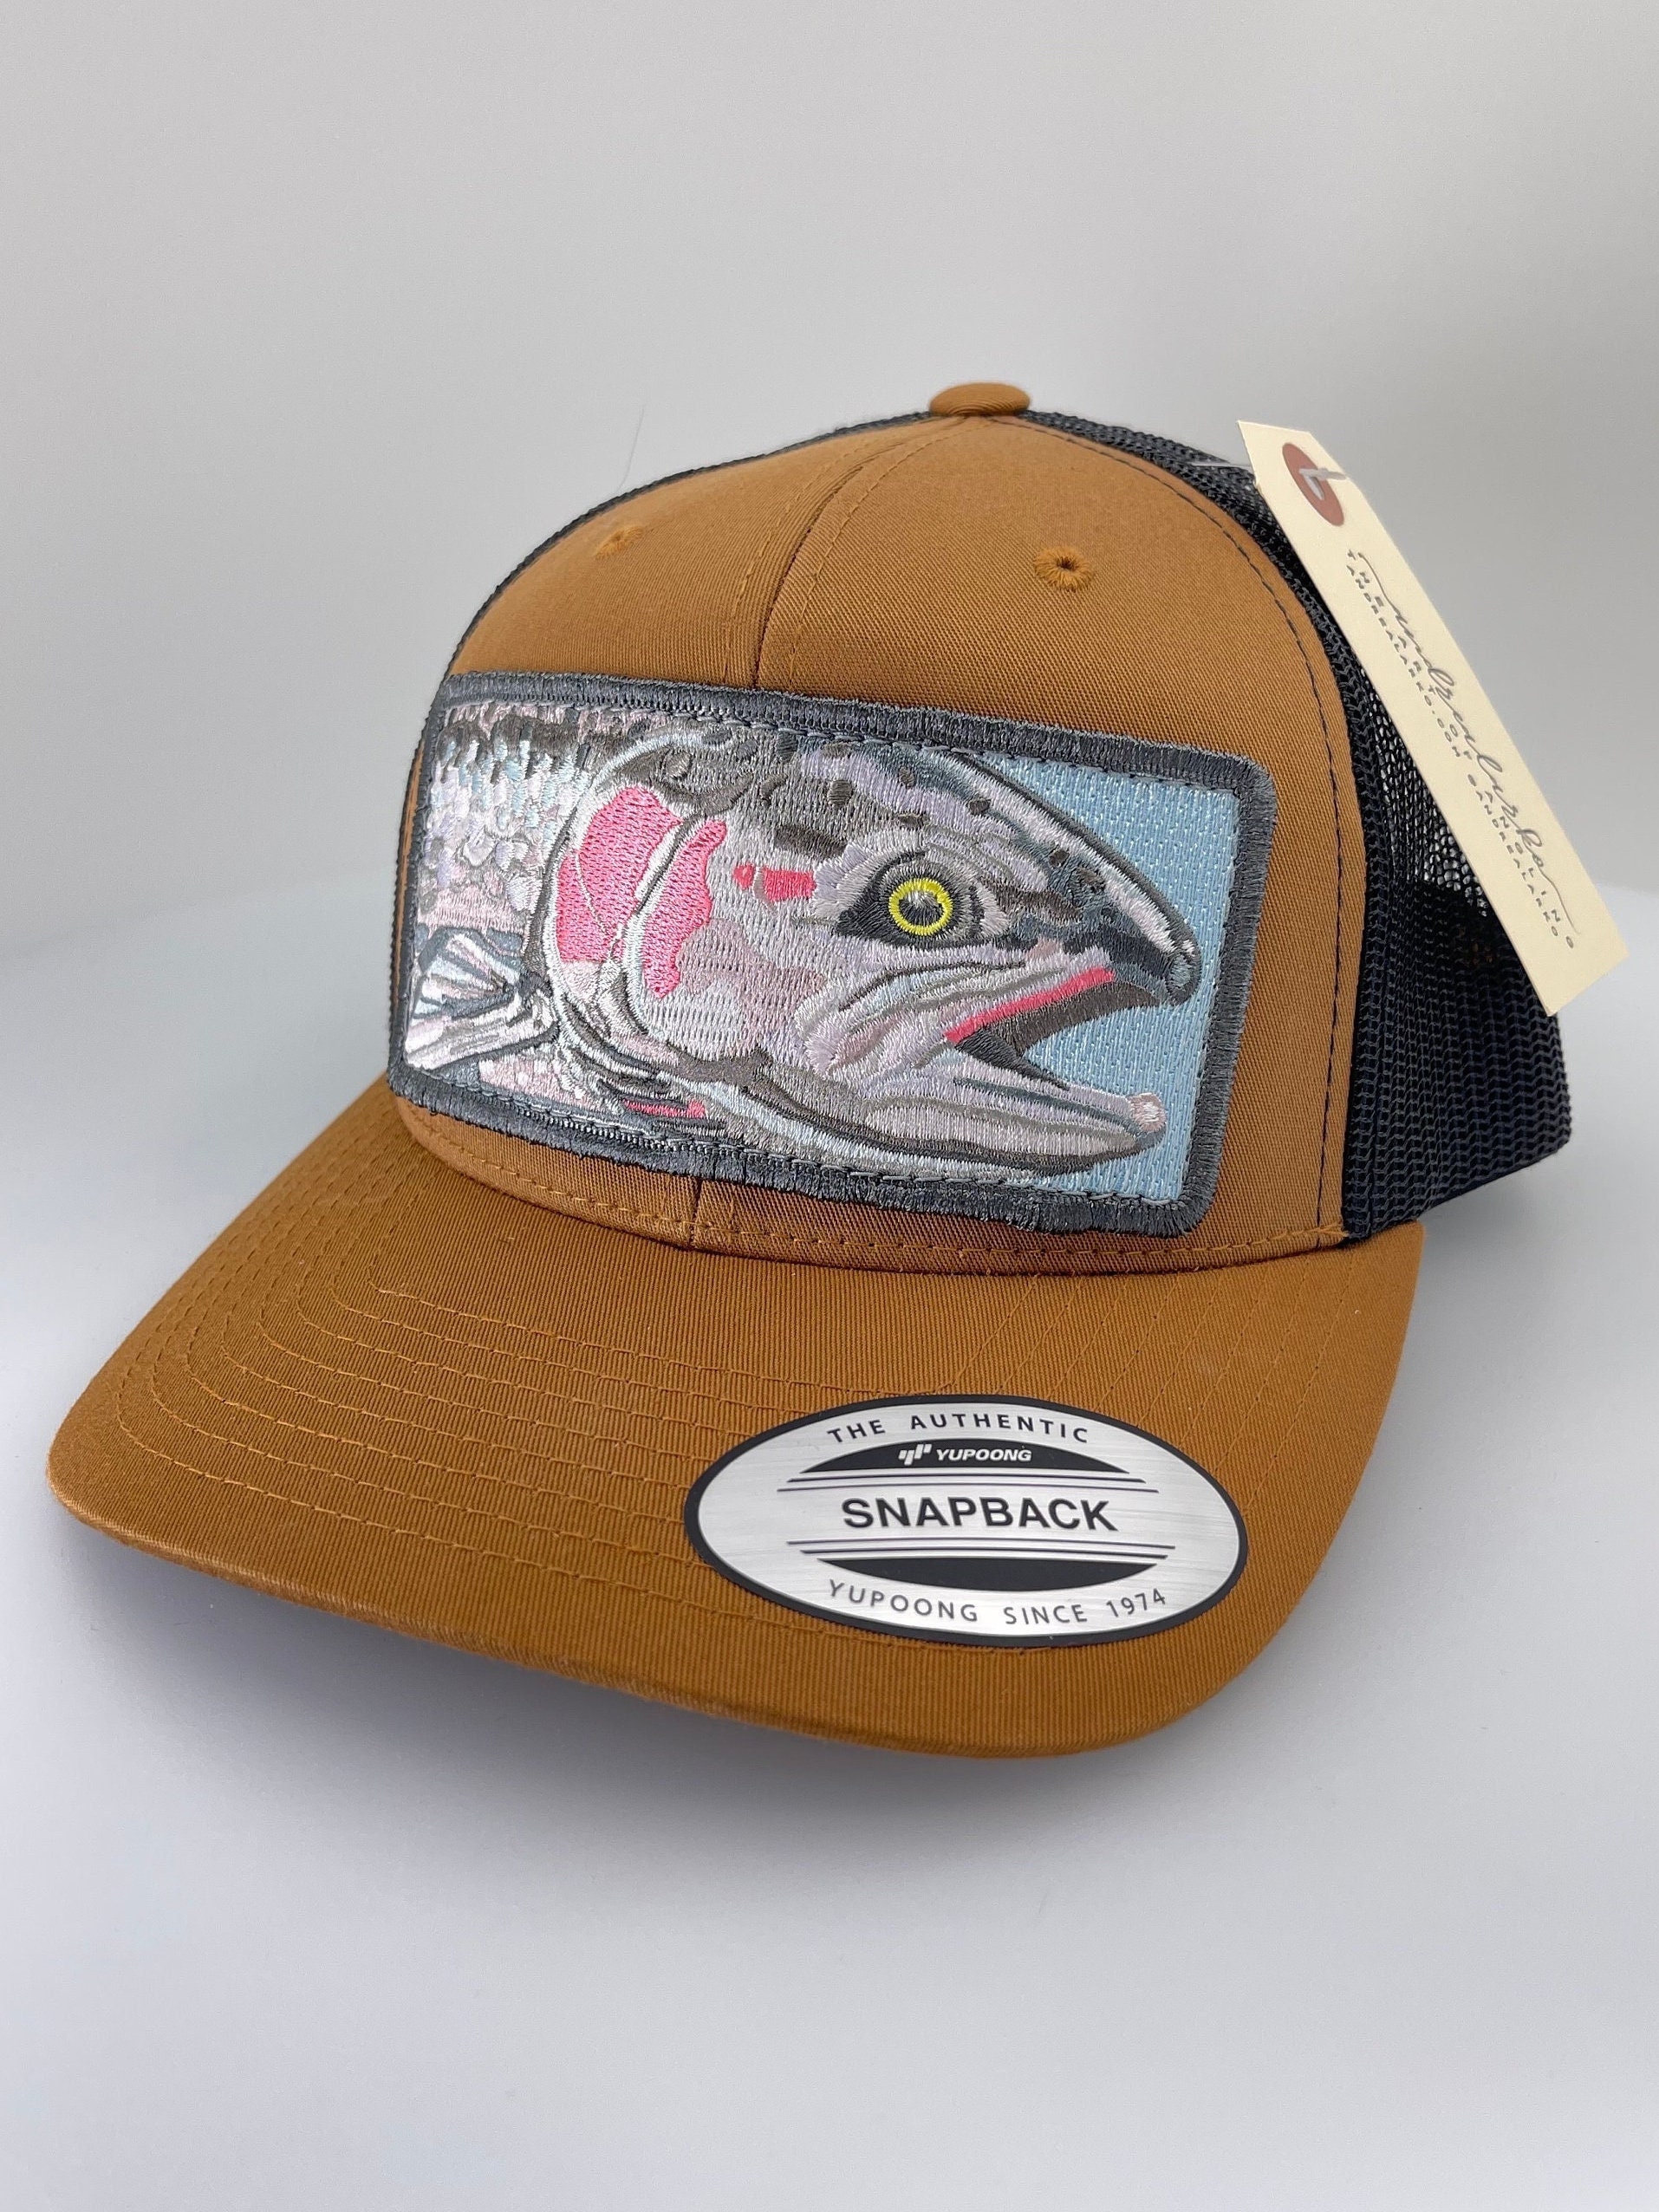 Andrea Larko on Instagram: Limited edition smallmouth bass hats